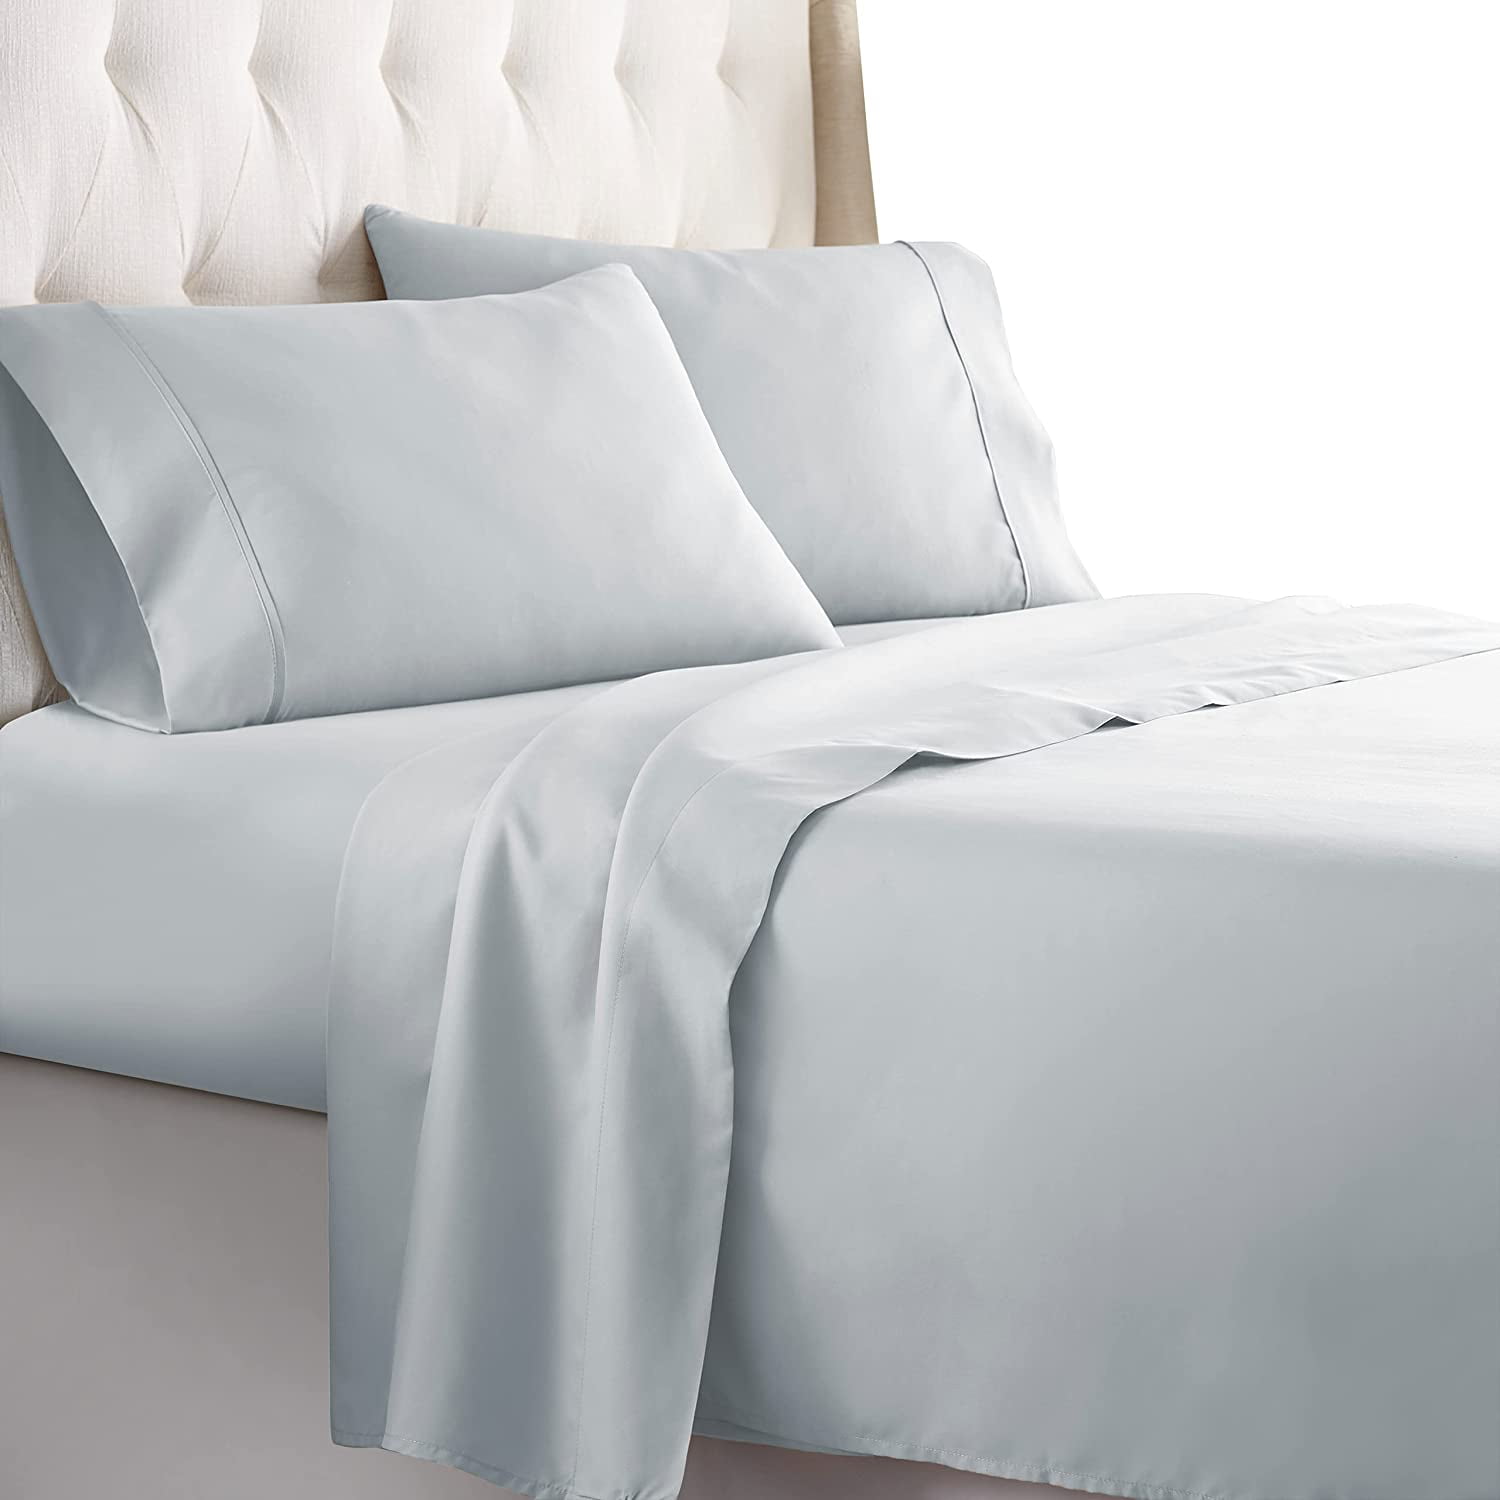 Super Deluxe 1800 Count Hotel Quality 4 Piece Deep Pocket Bed Sheet Set 